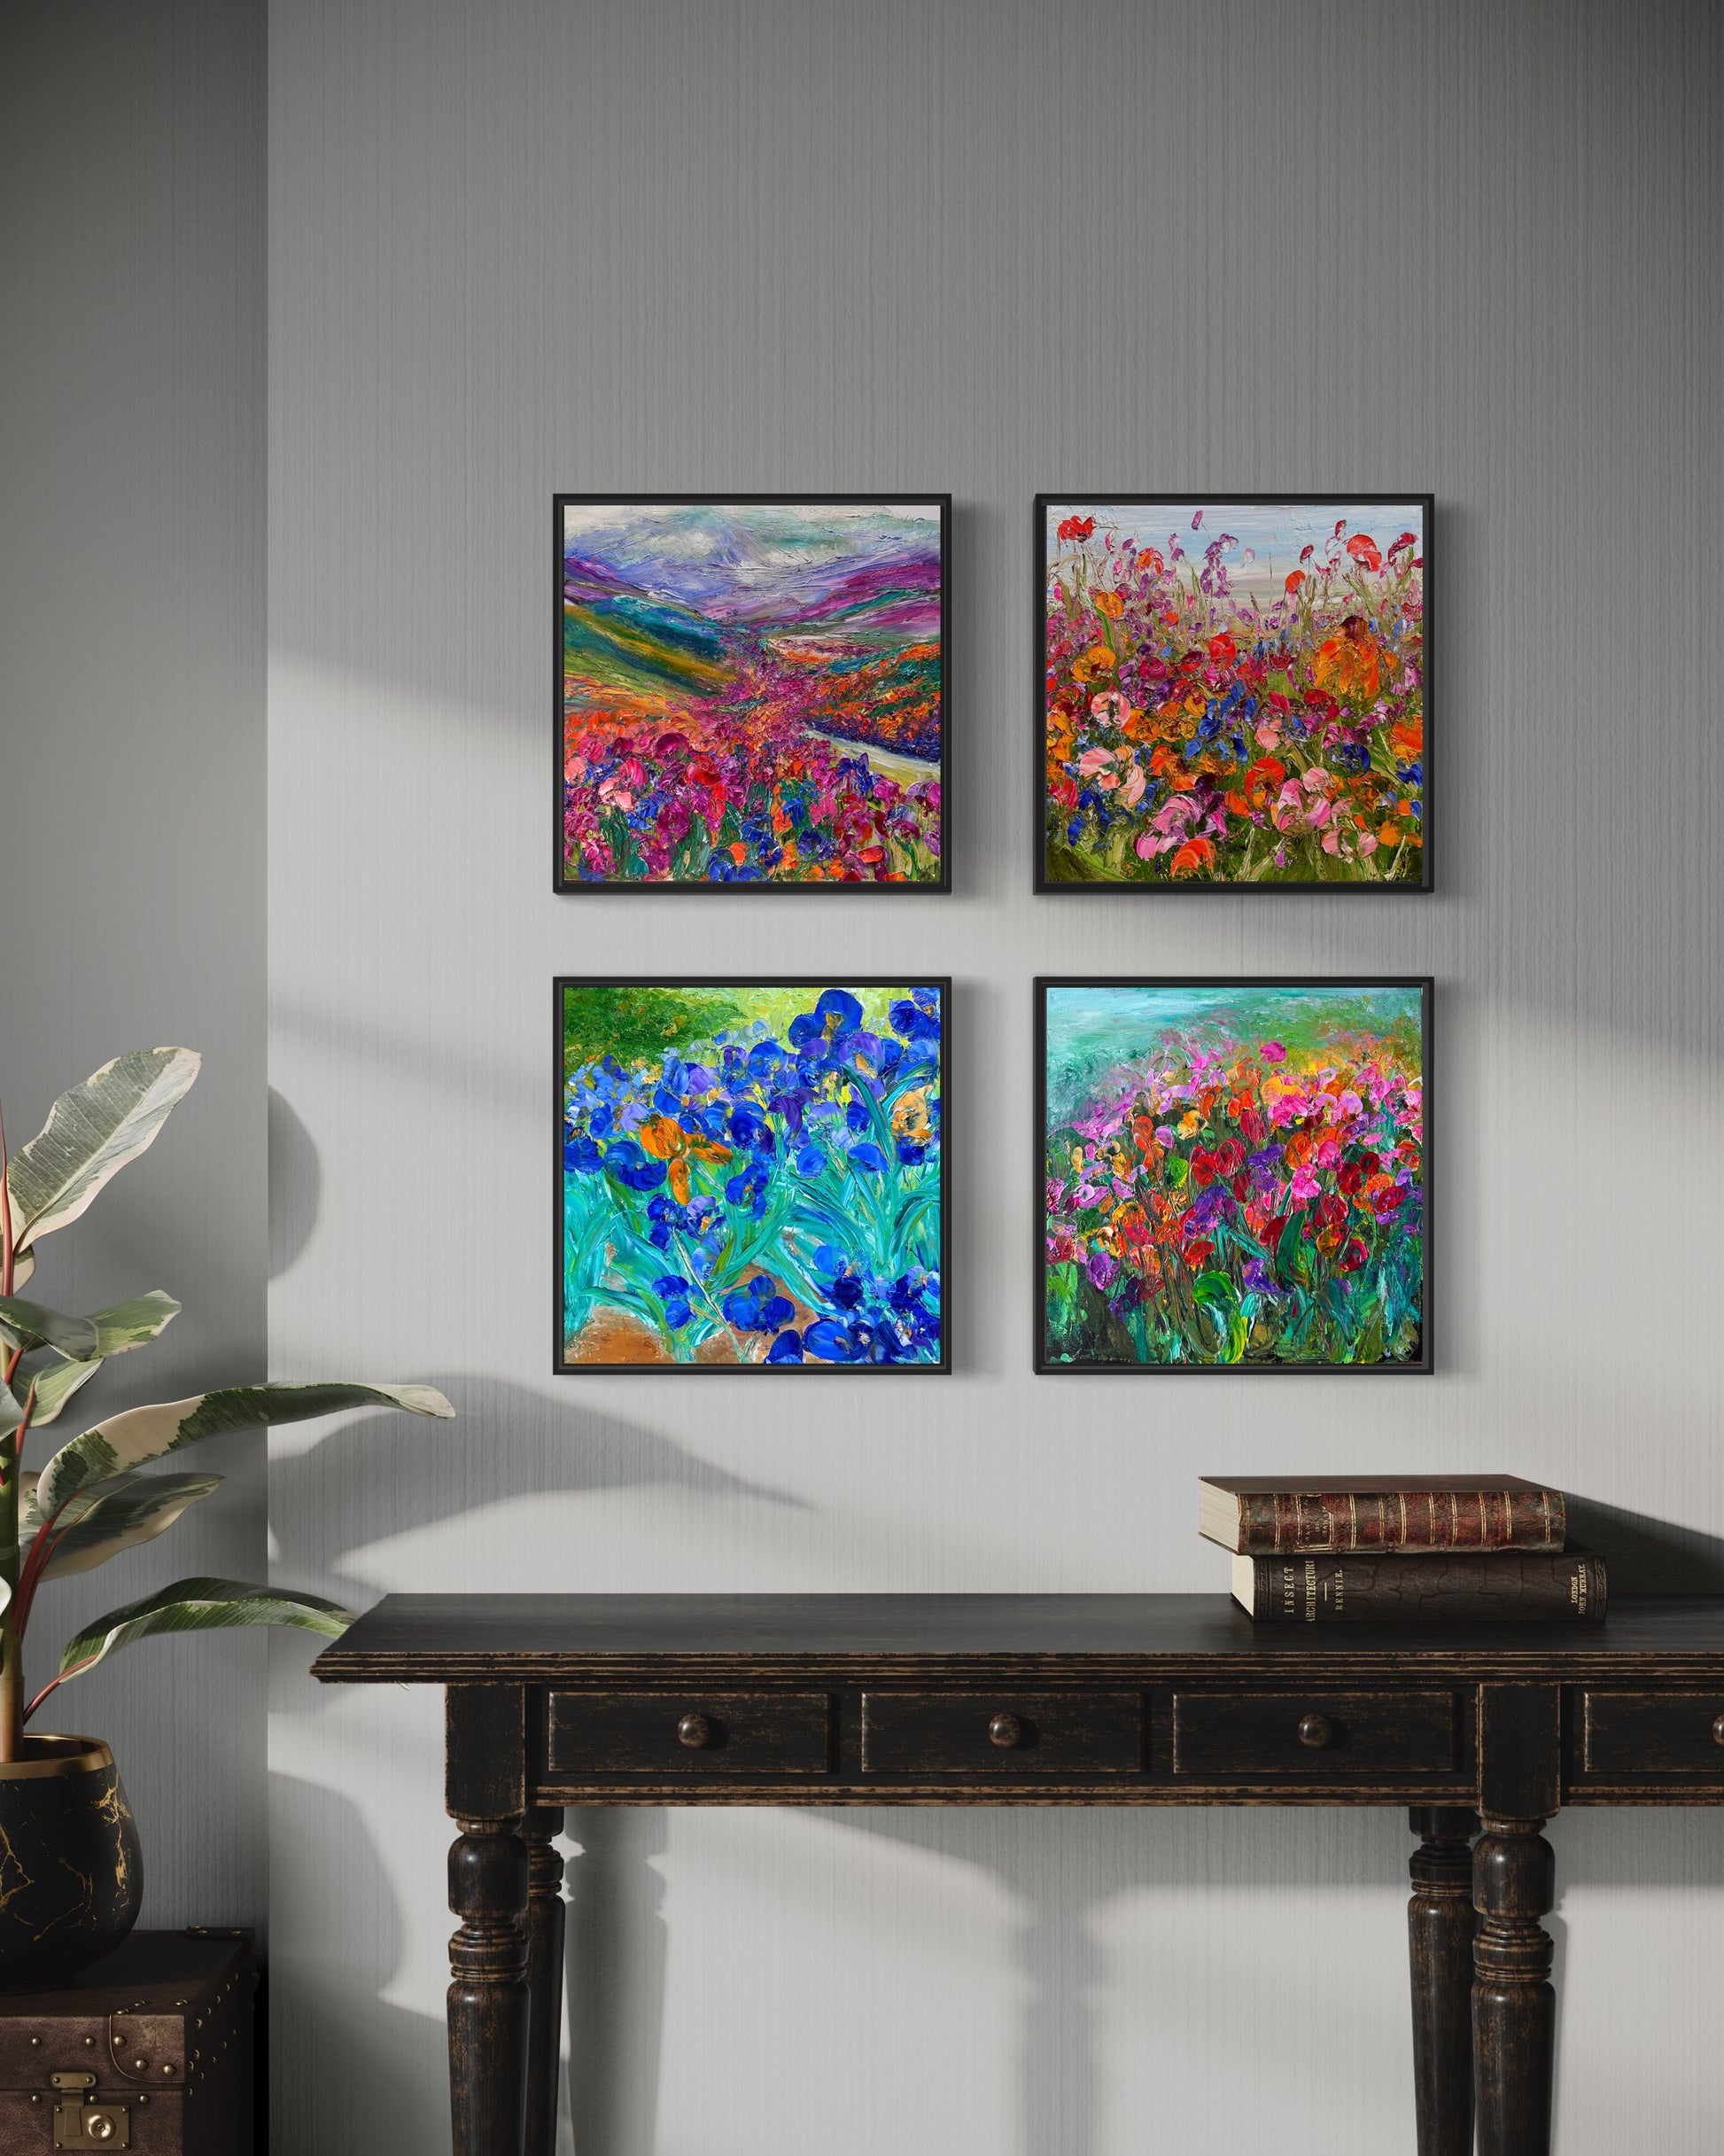 Set of four paintings of flower fields shown in a room.